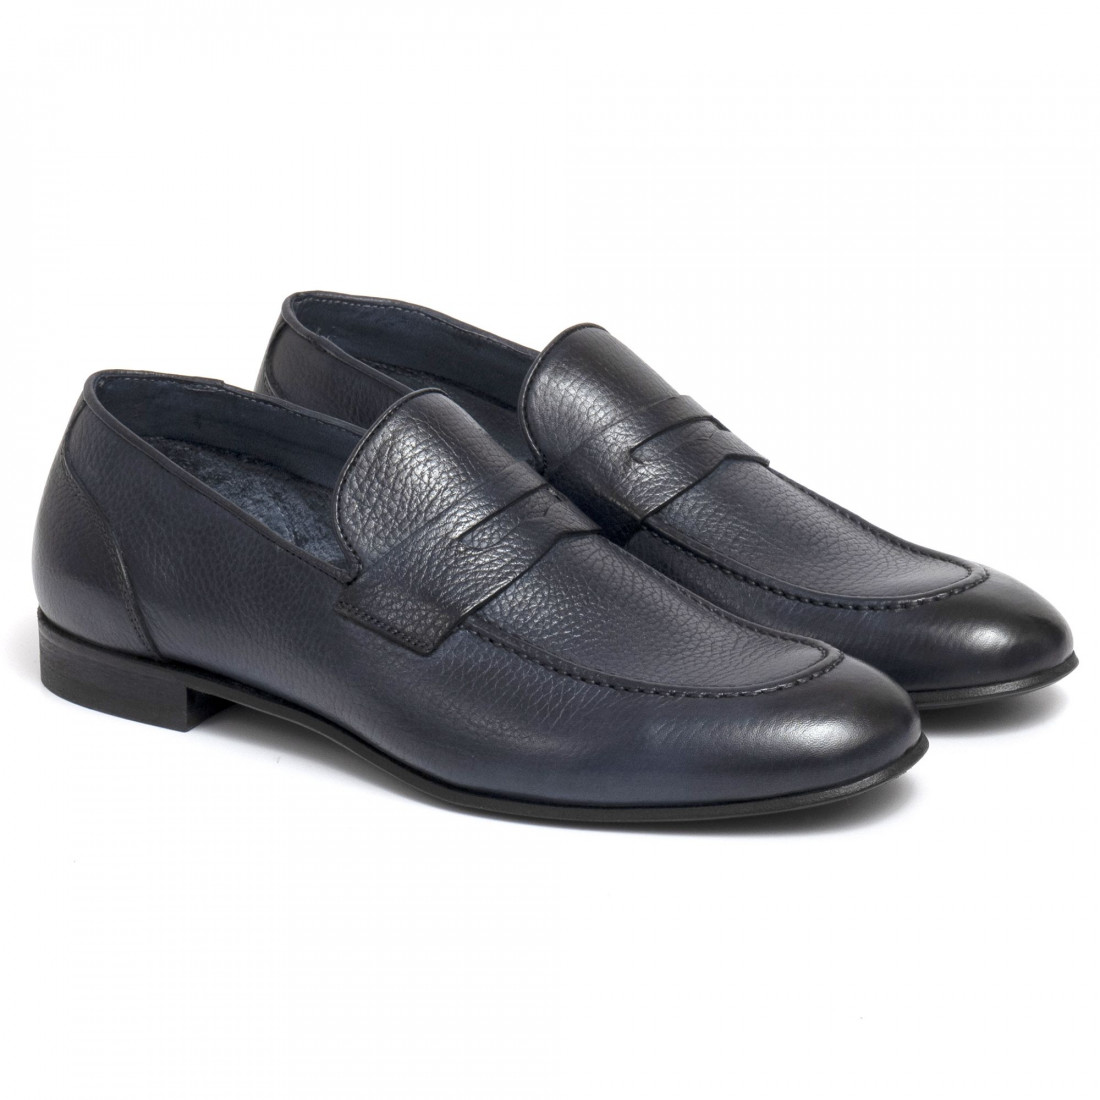 Blue John White men's loafers in unlined leather